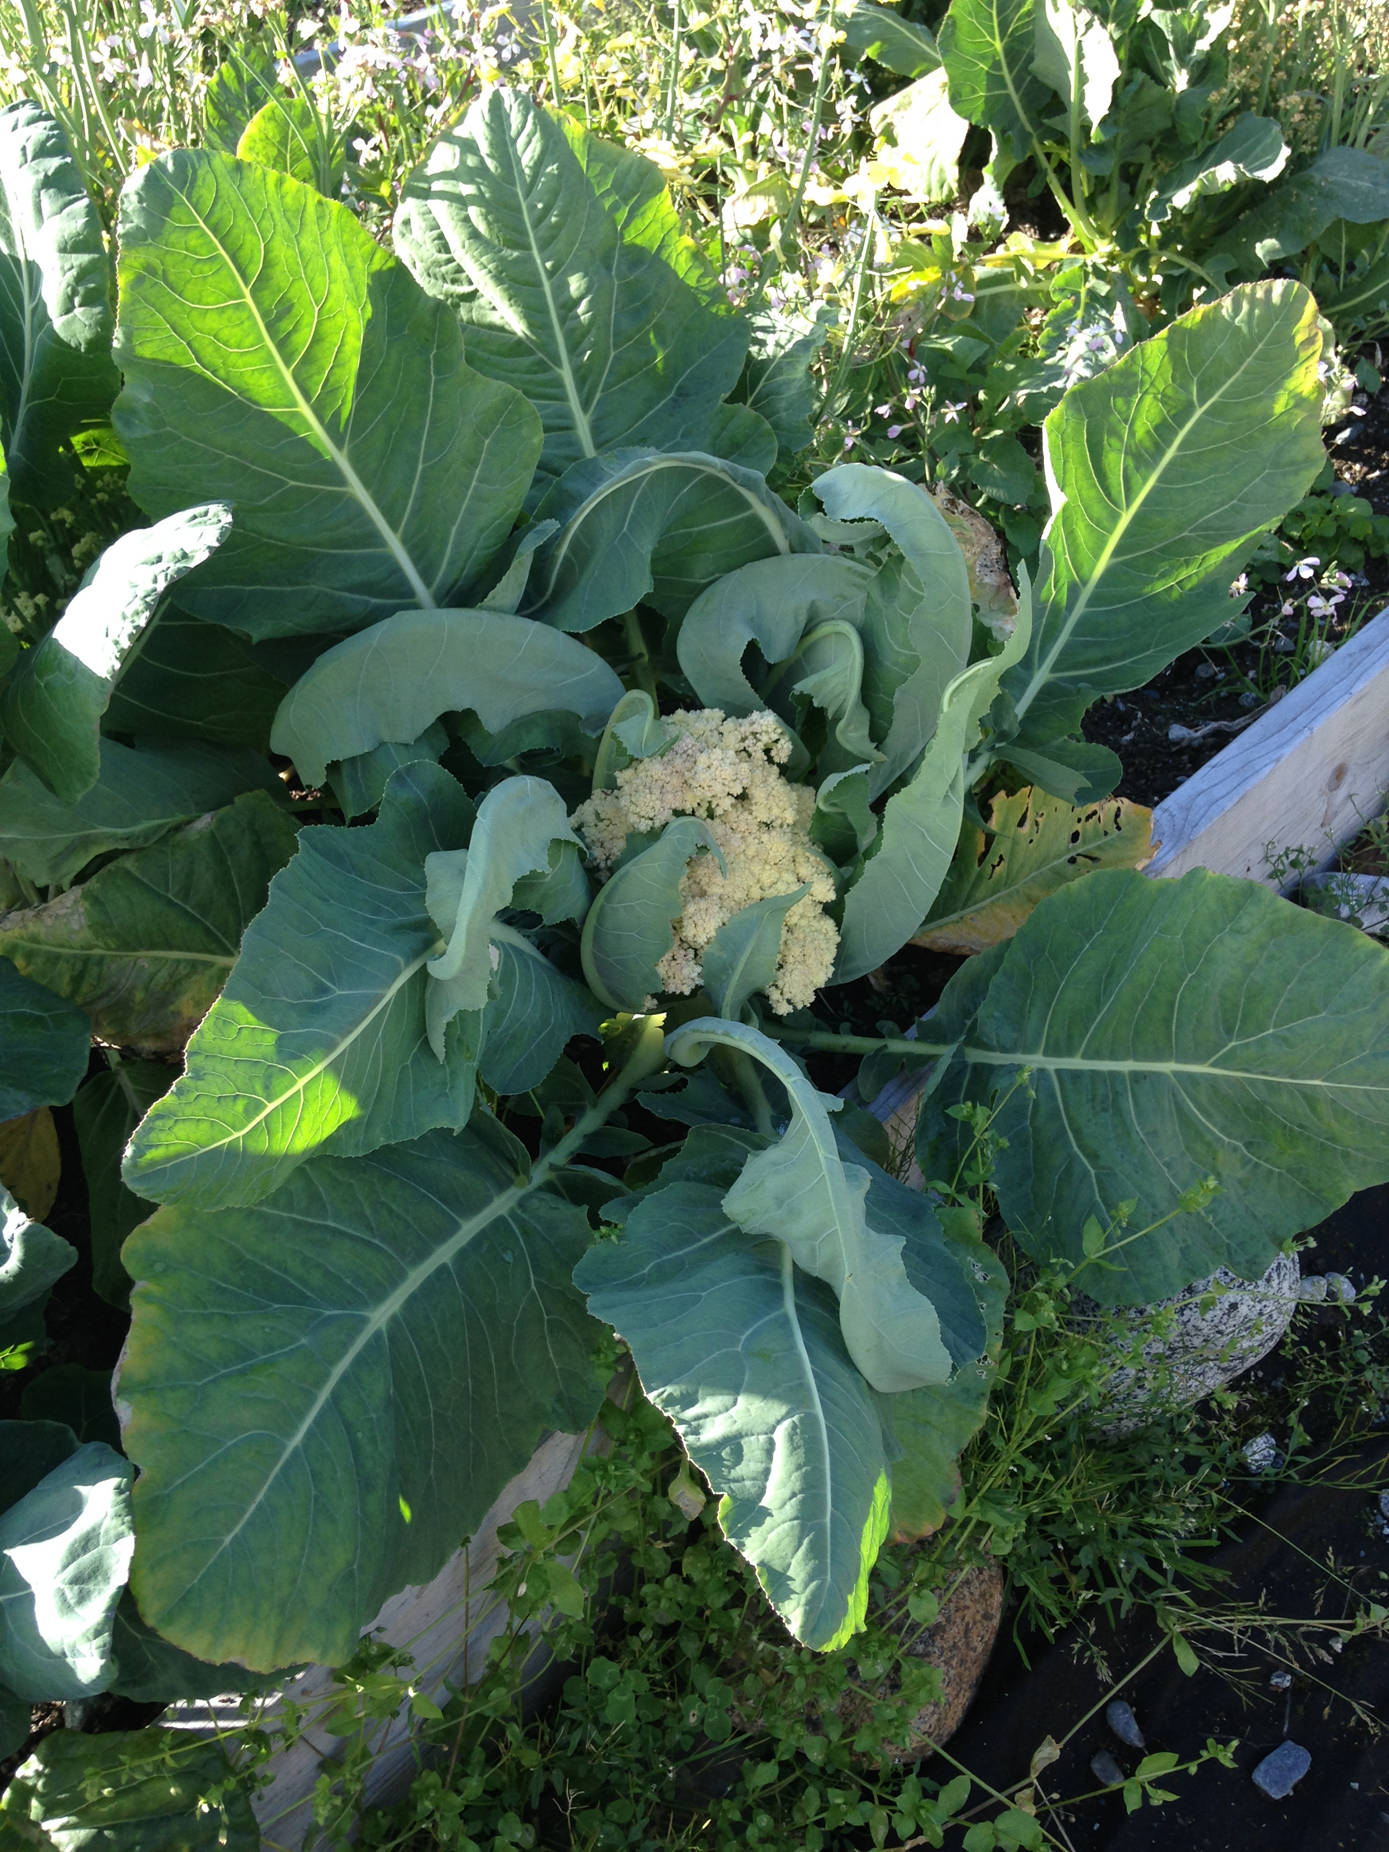 A cauliflower hidden by its protective leaves. (Corinne Conlon | For the Juneau Empire)